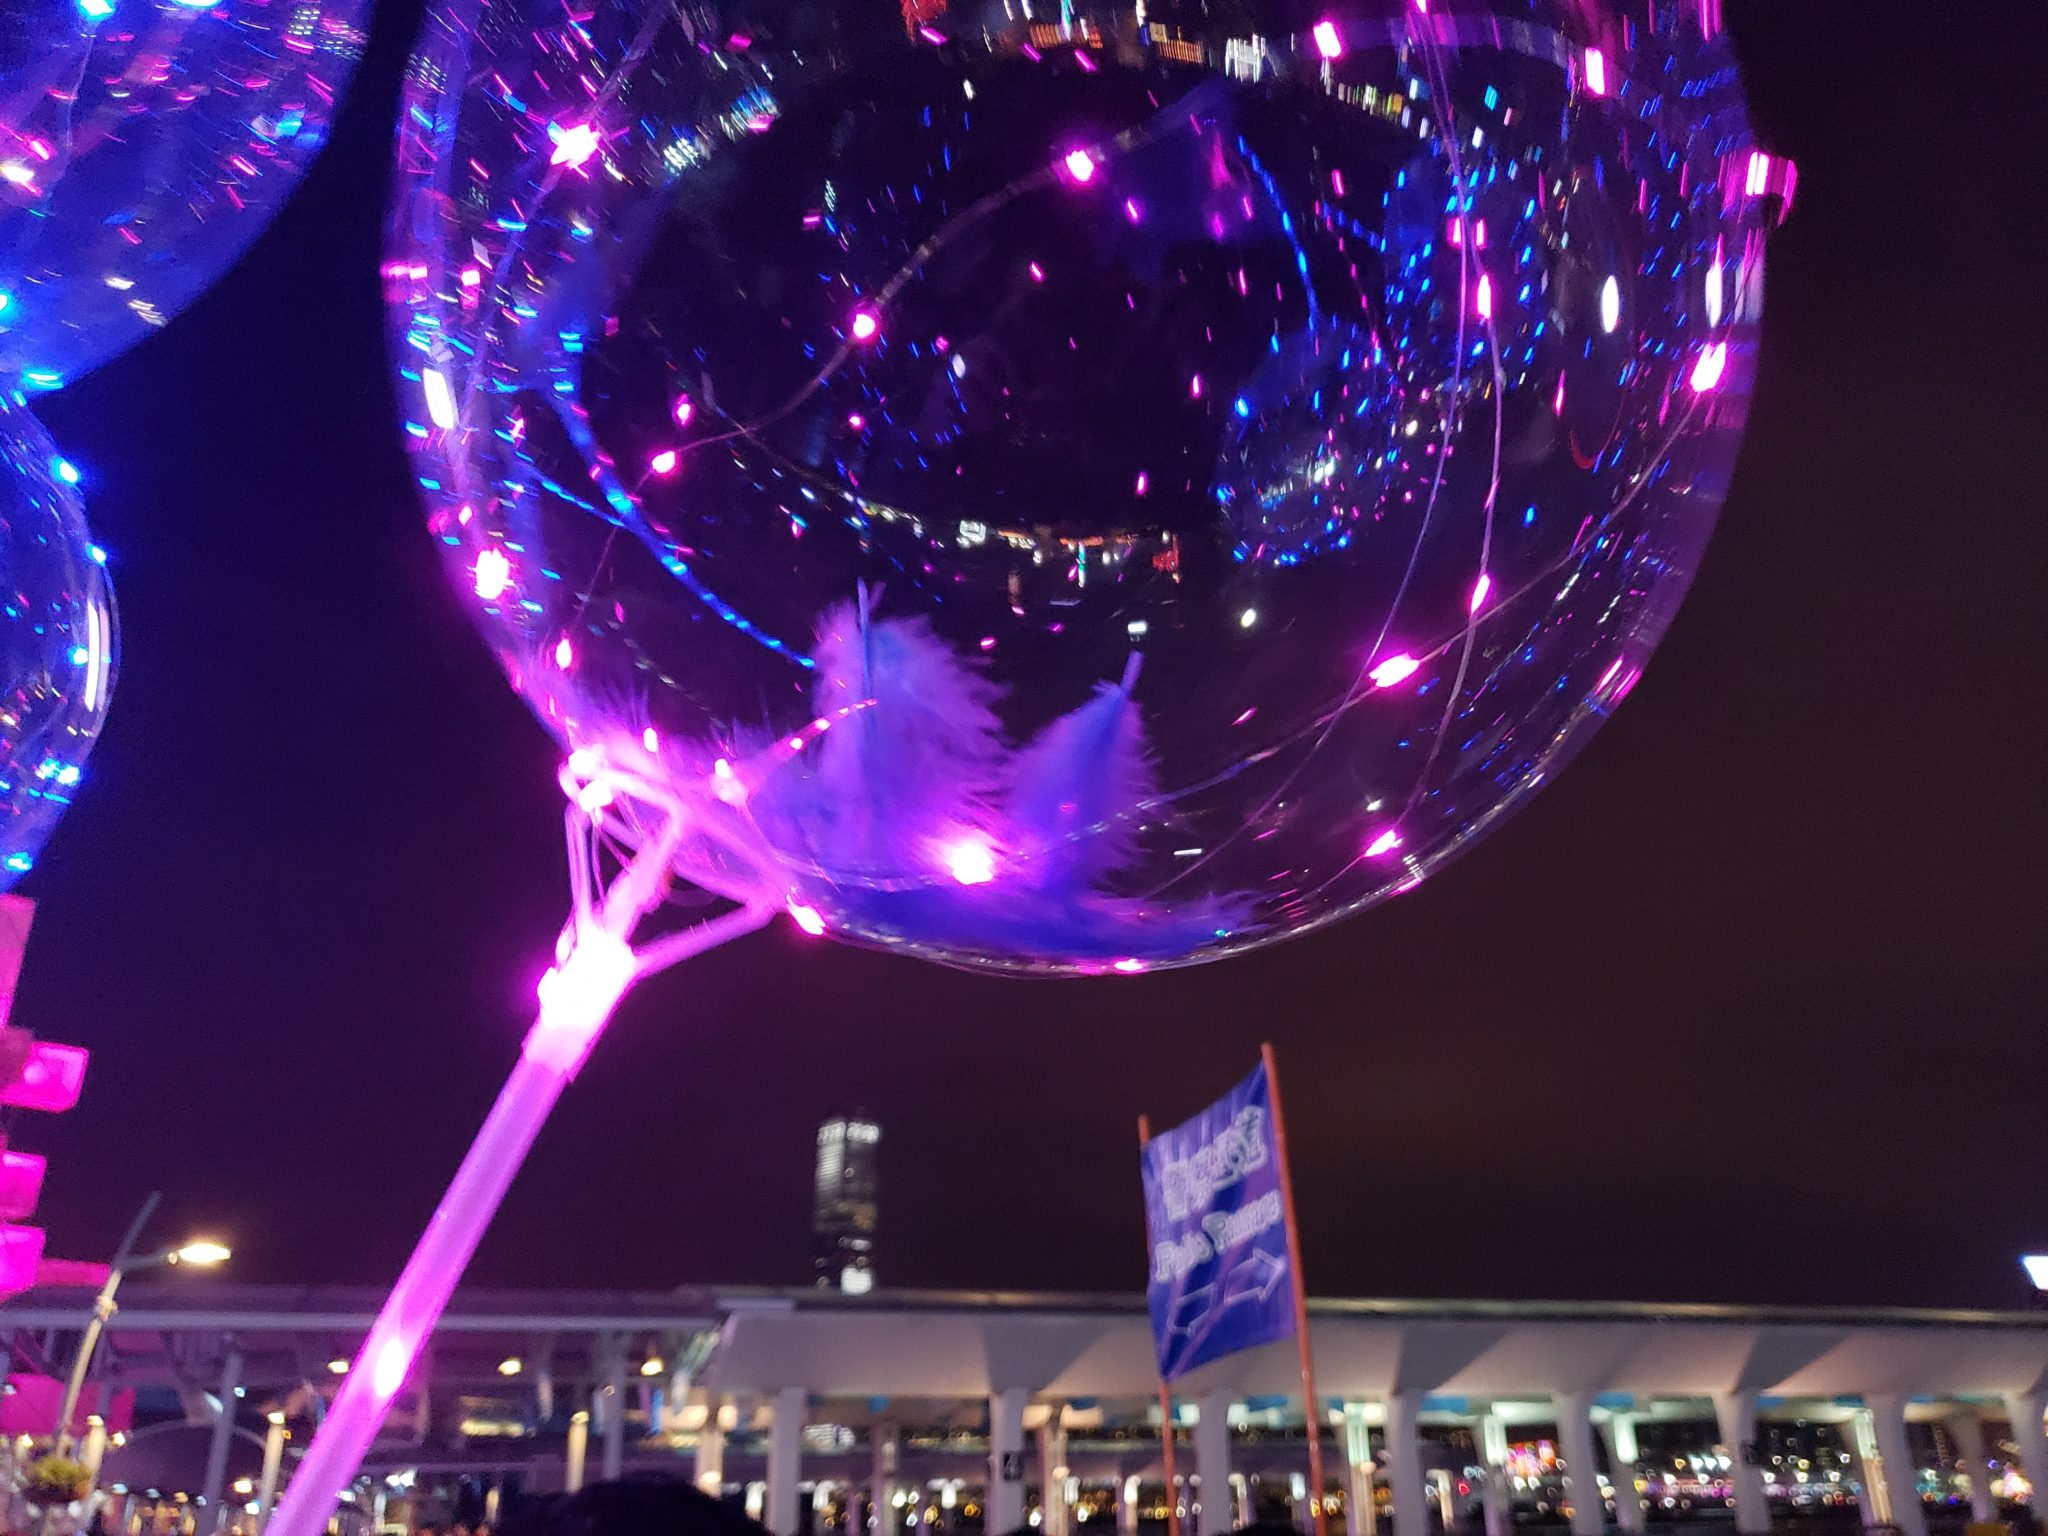 a large bubble with lights